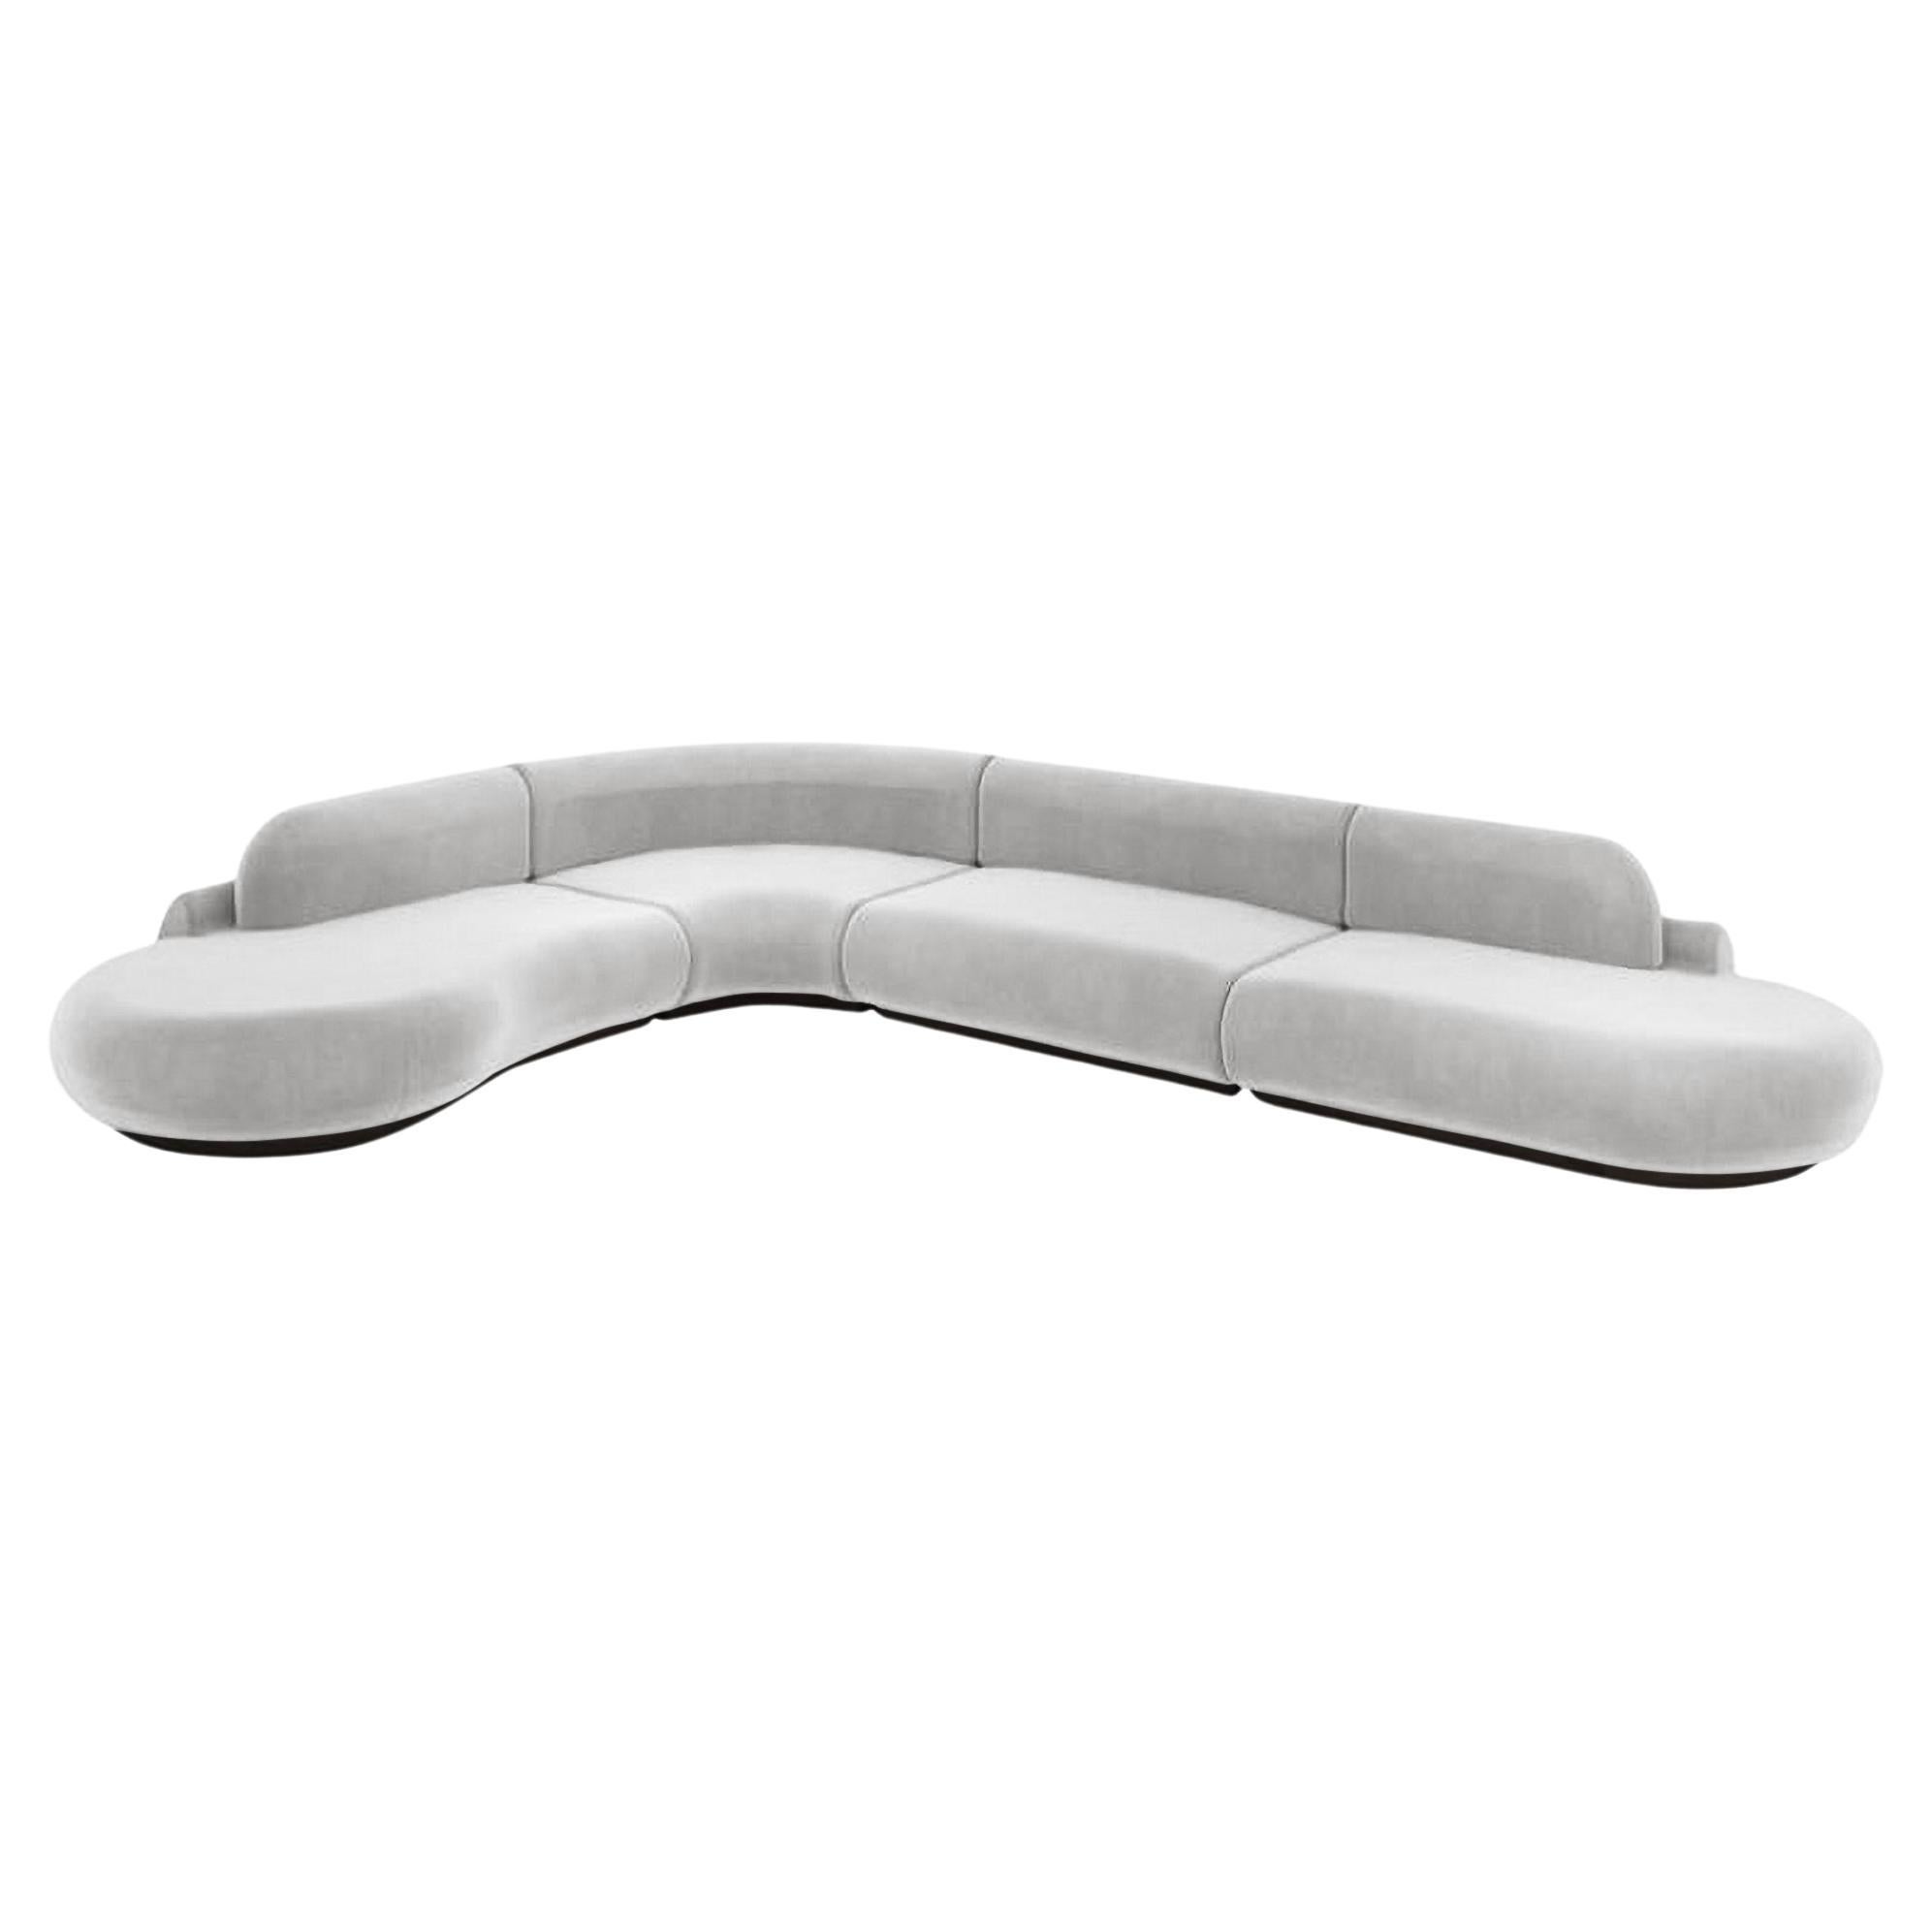 Naked Curved Sectional Sofa, 4 Piece with Beech Ash-056-5 and Aluminium